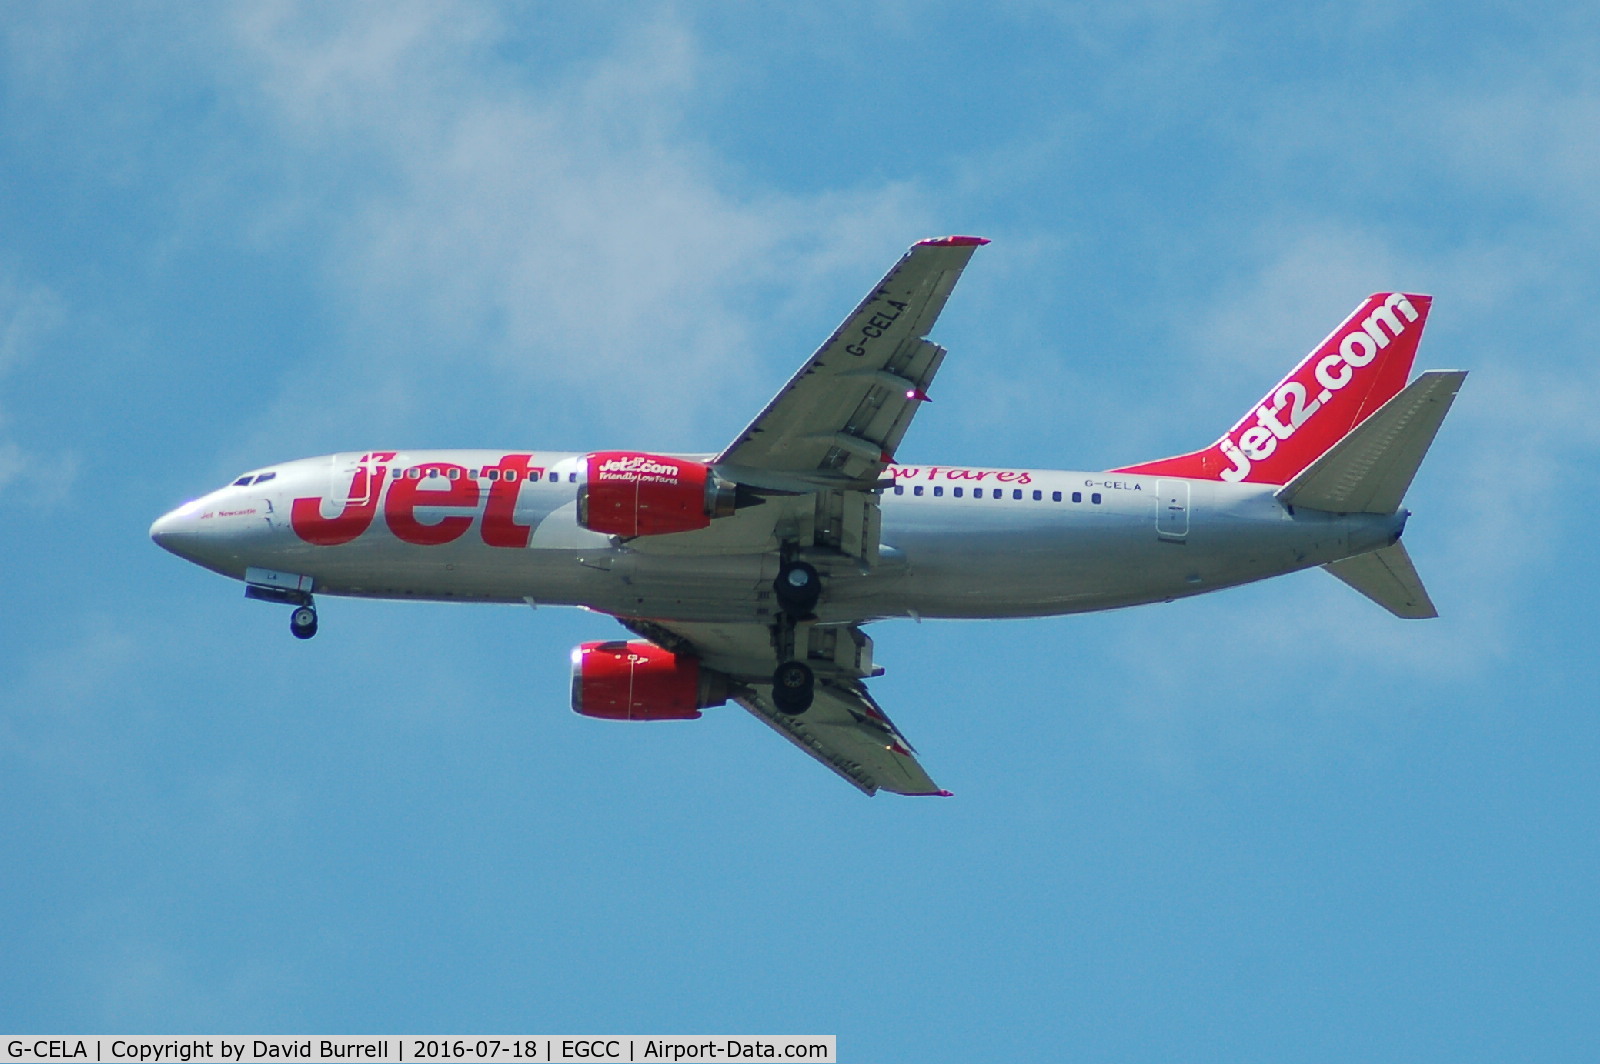 G-CELA, 1986 Boeing 737-377(QC) C/N 23663, Jet2.com G-CELA on approach to Manchester Airport.